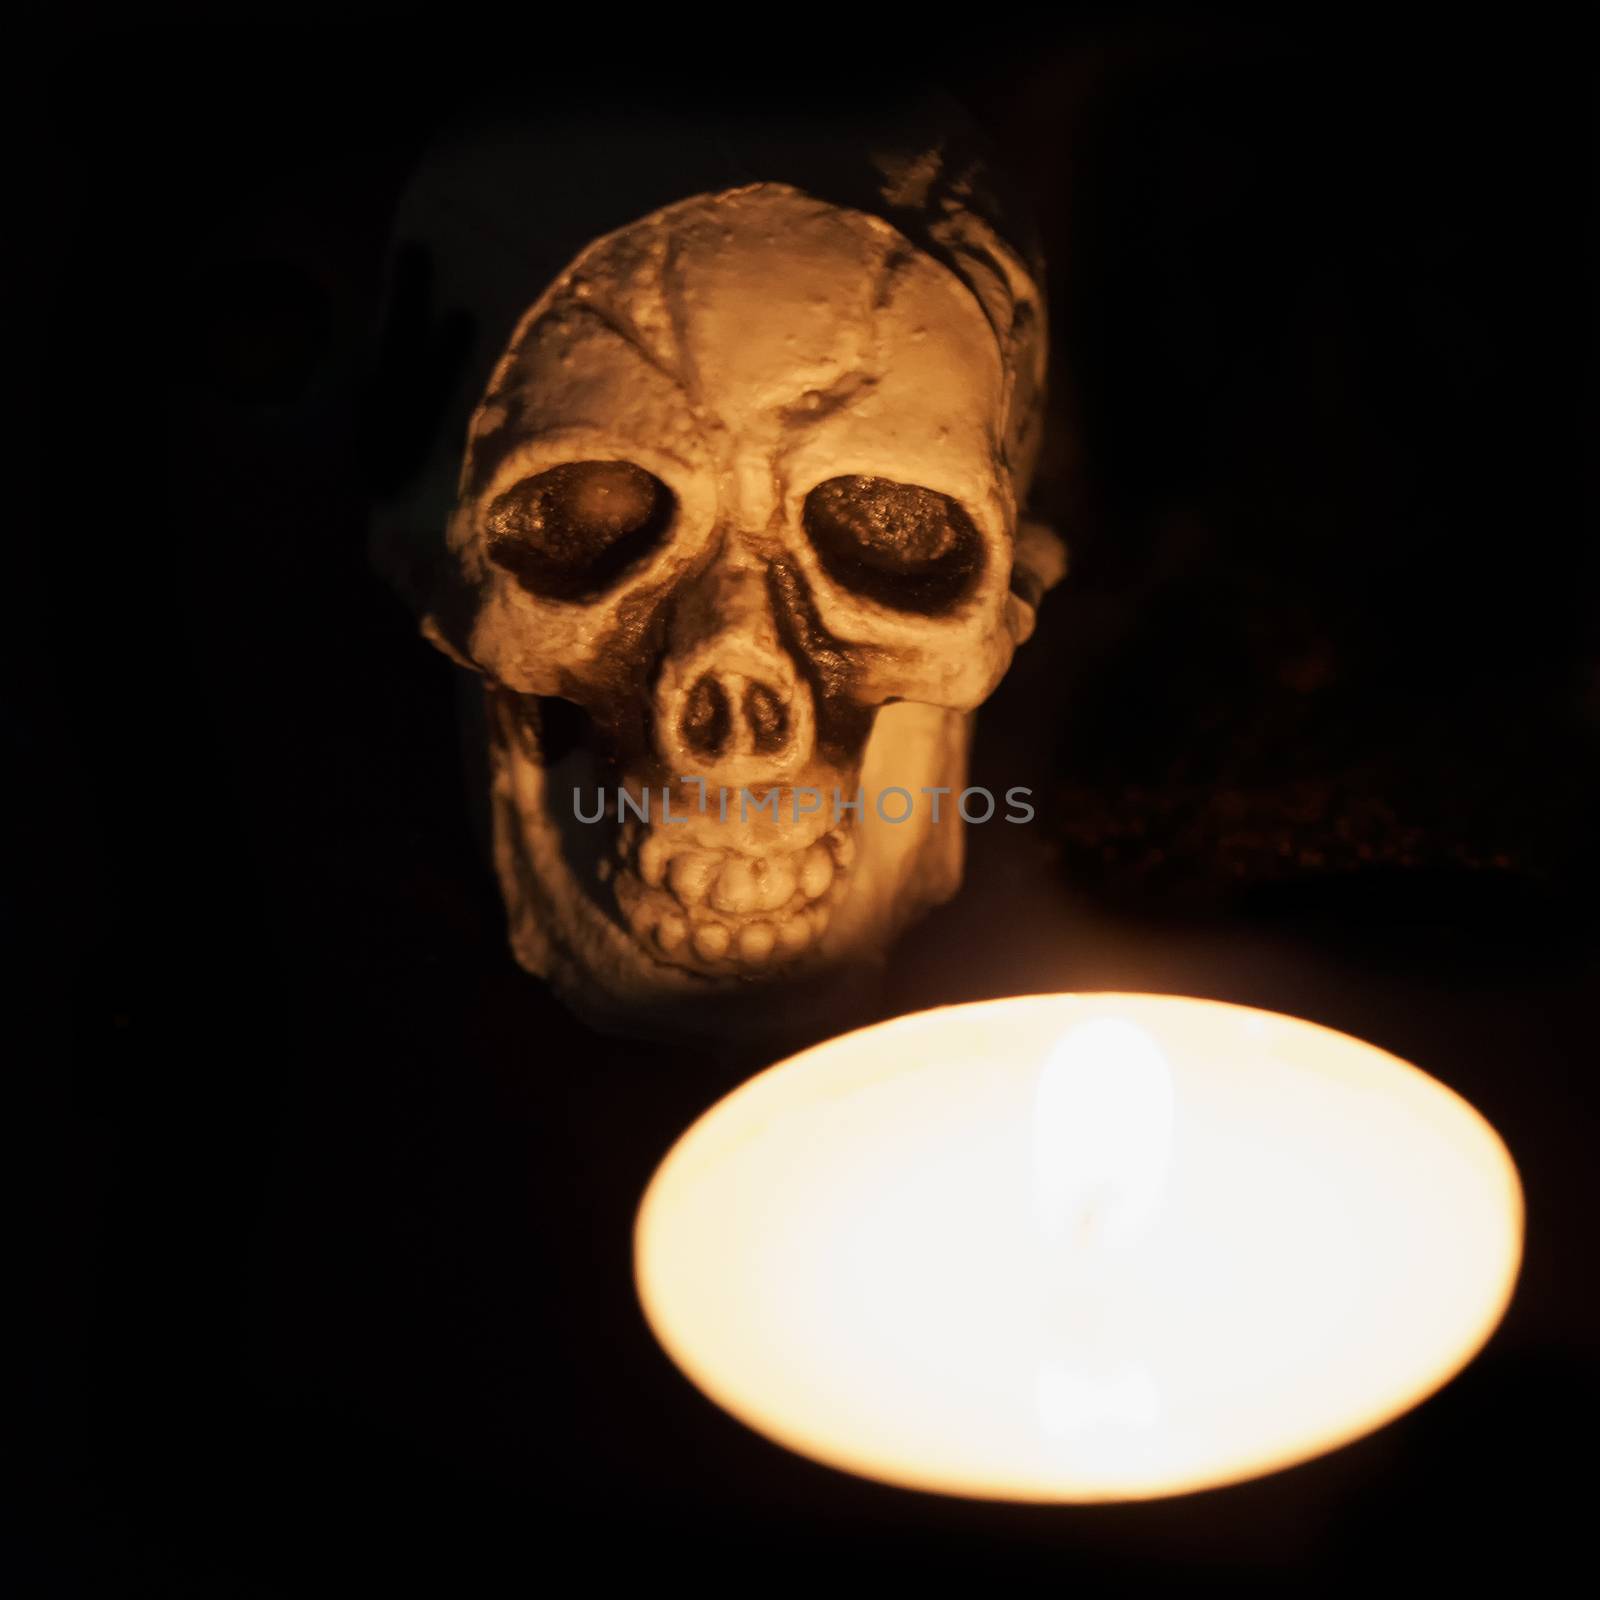 Skull and candle by Koufax73